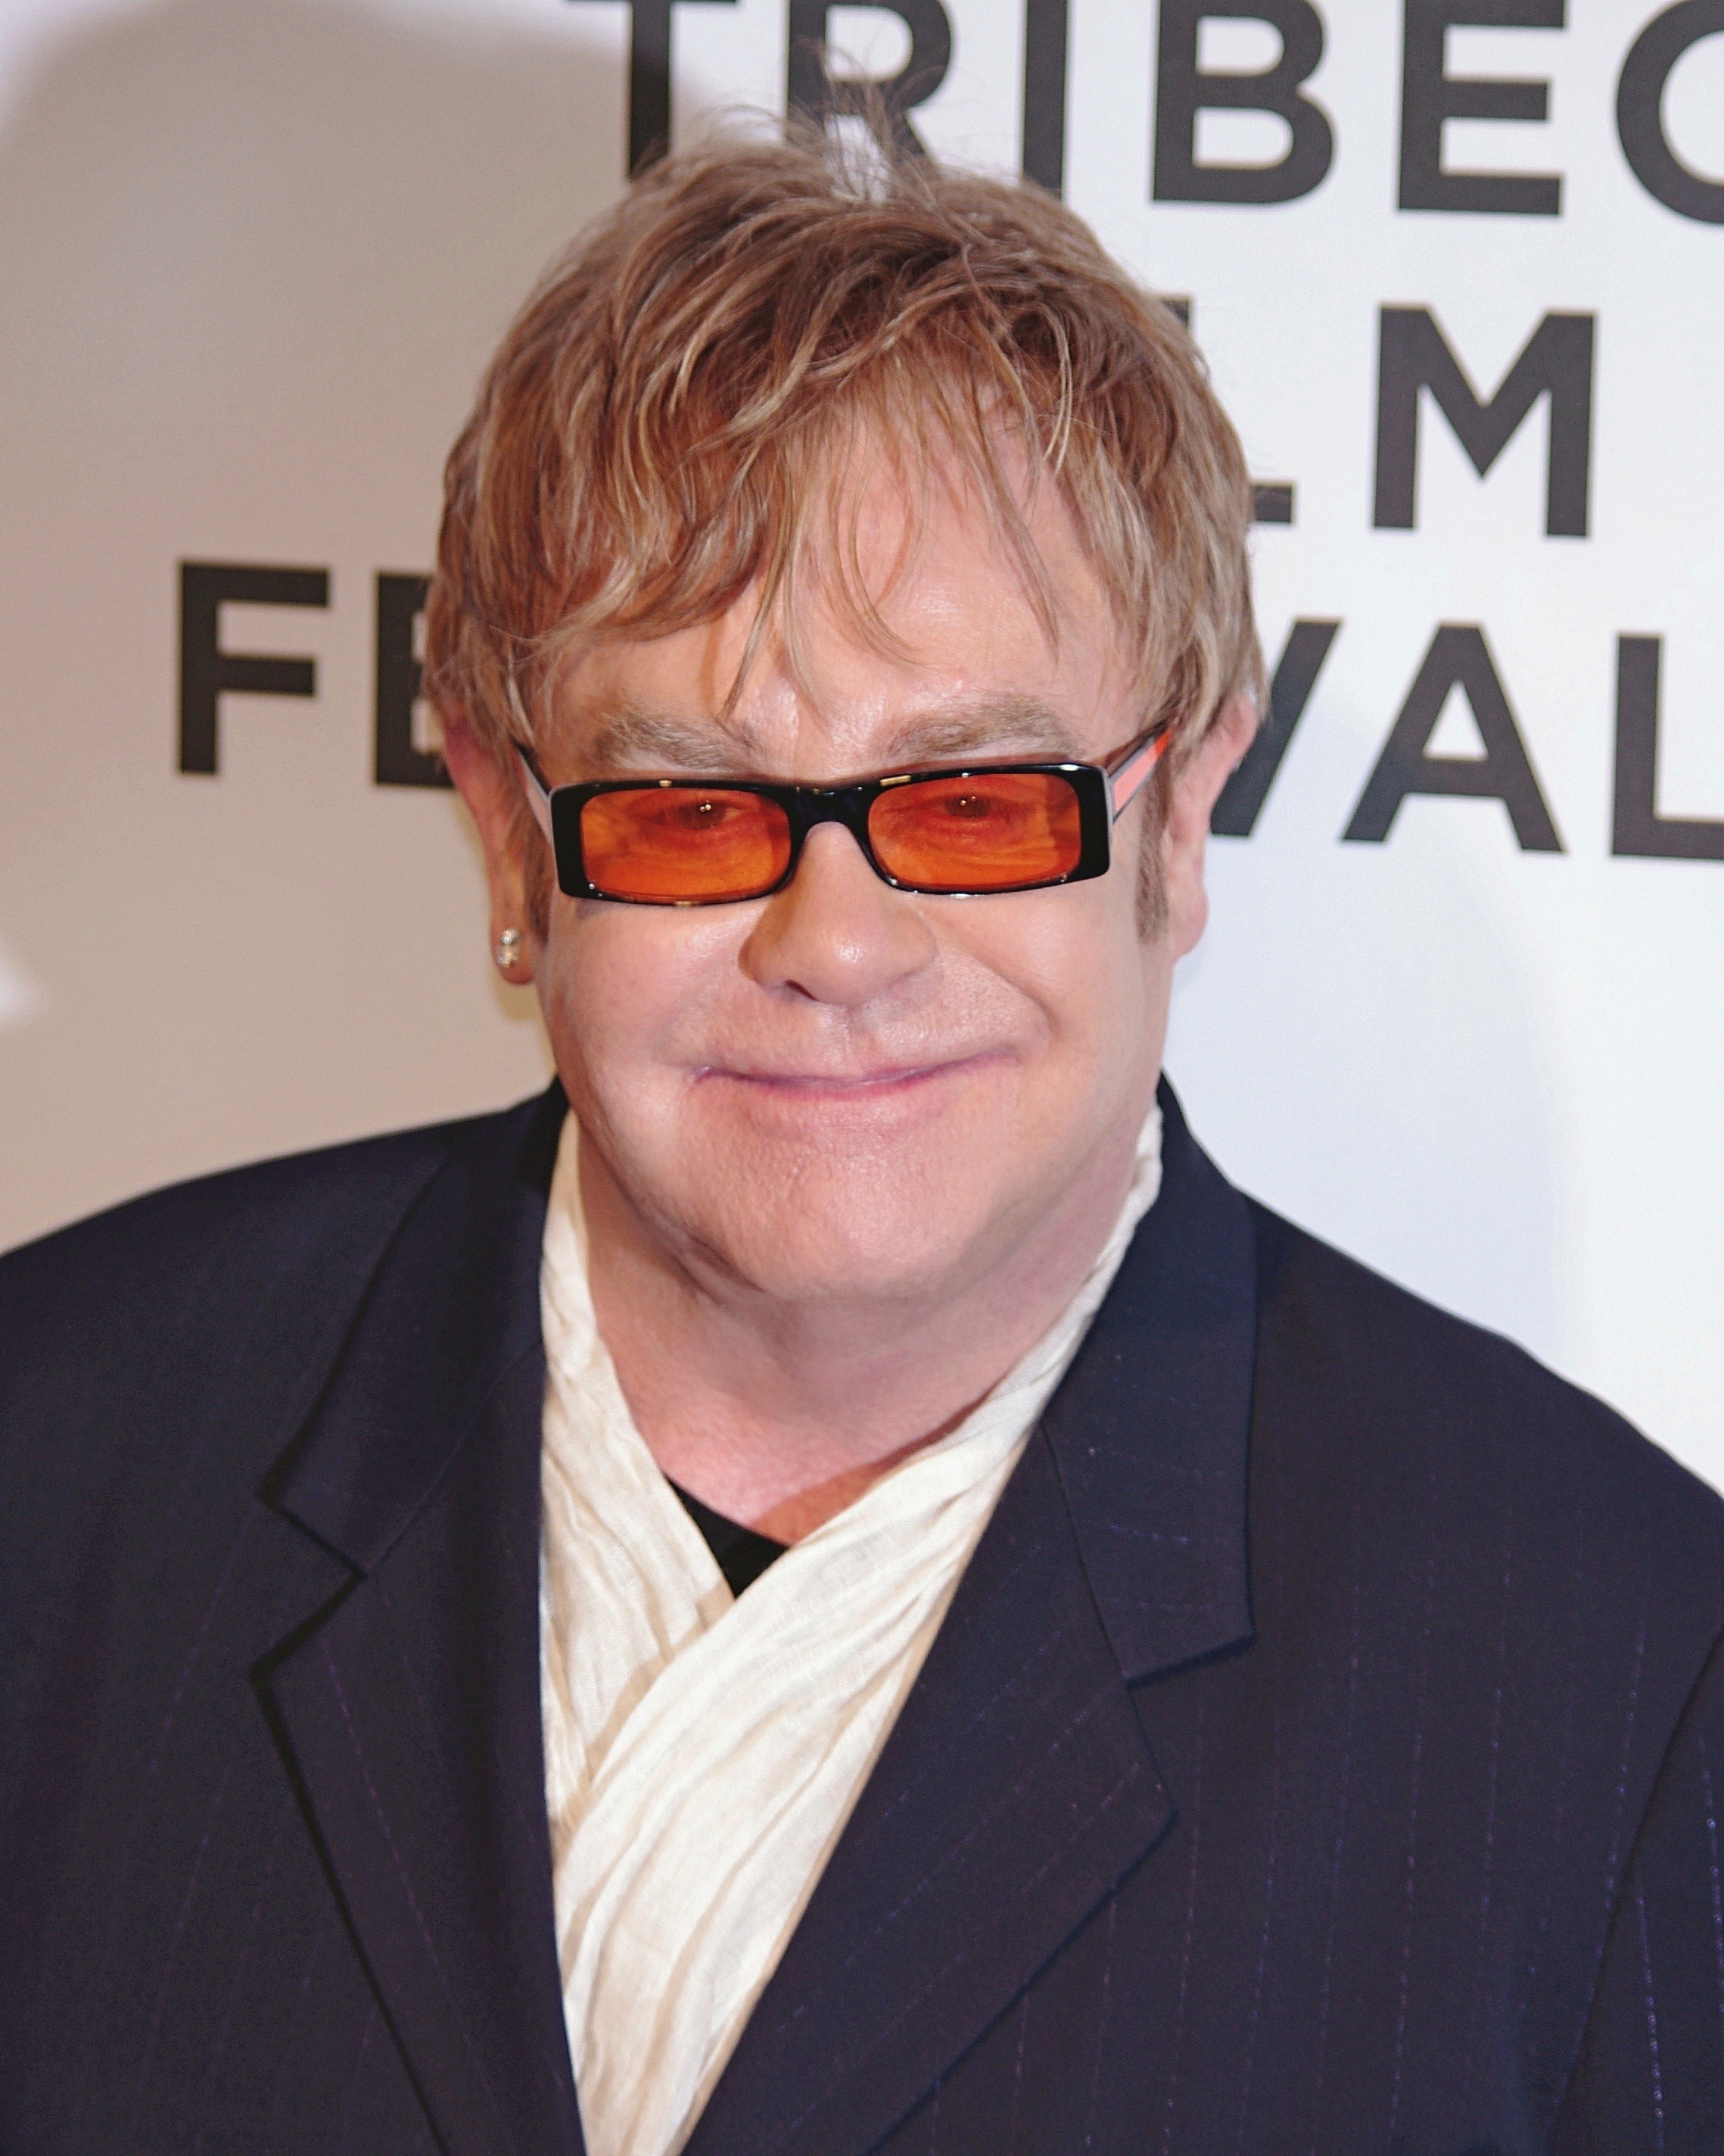 Peoples' News Roundup: Elton John blasts 'relentless' character assassination of Harry and Meghan